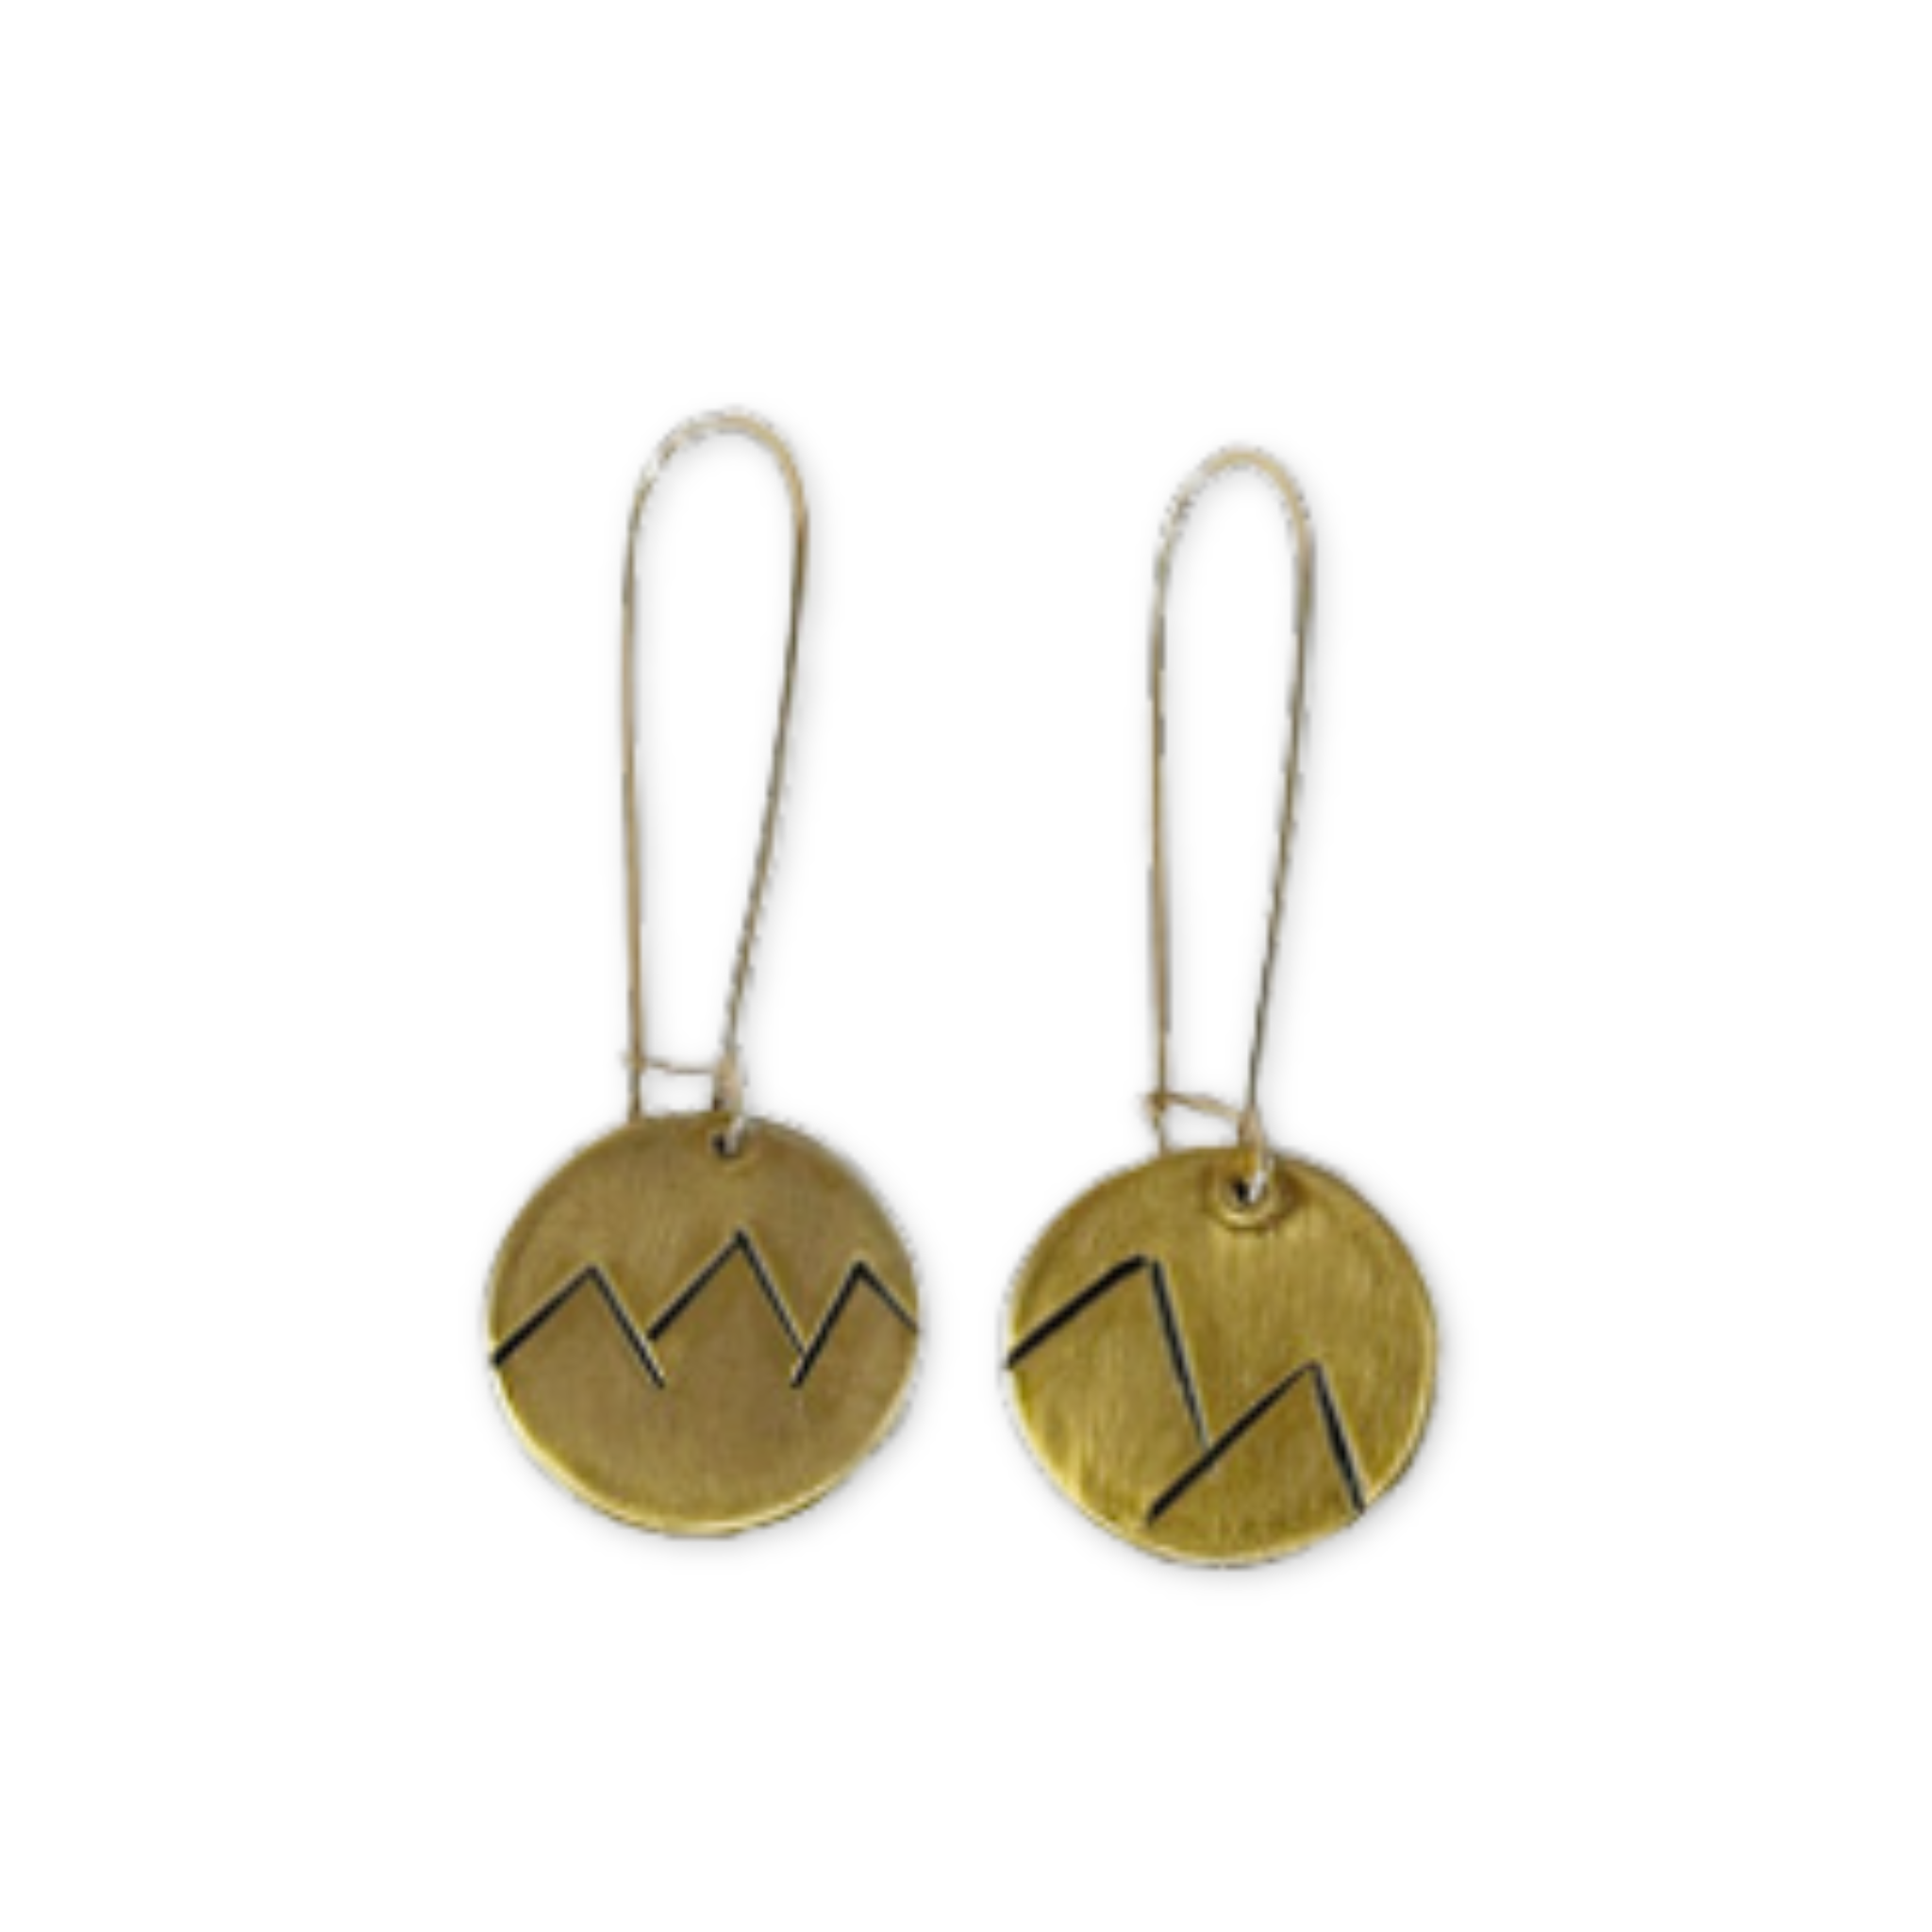 a pair of earrings with stamped mountains